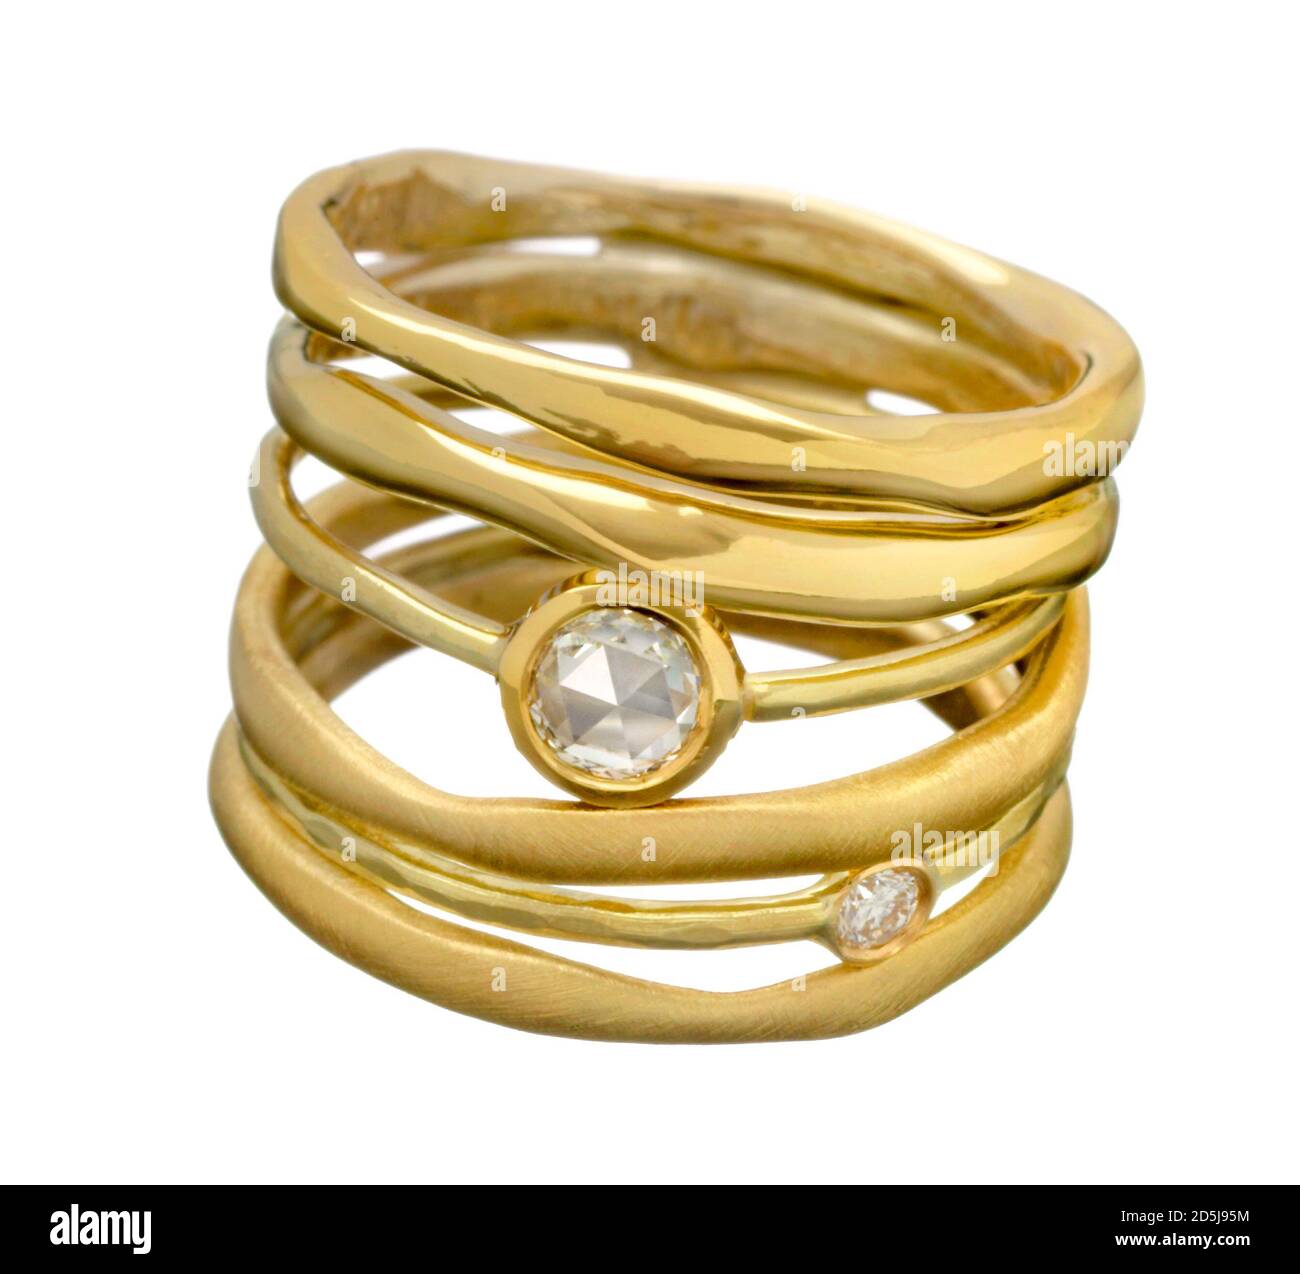 ippolita gold and diamond ring photographed on a white background Stock Photo